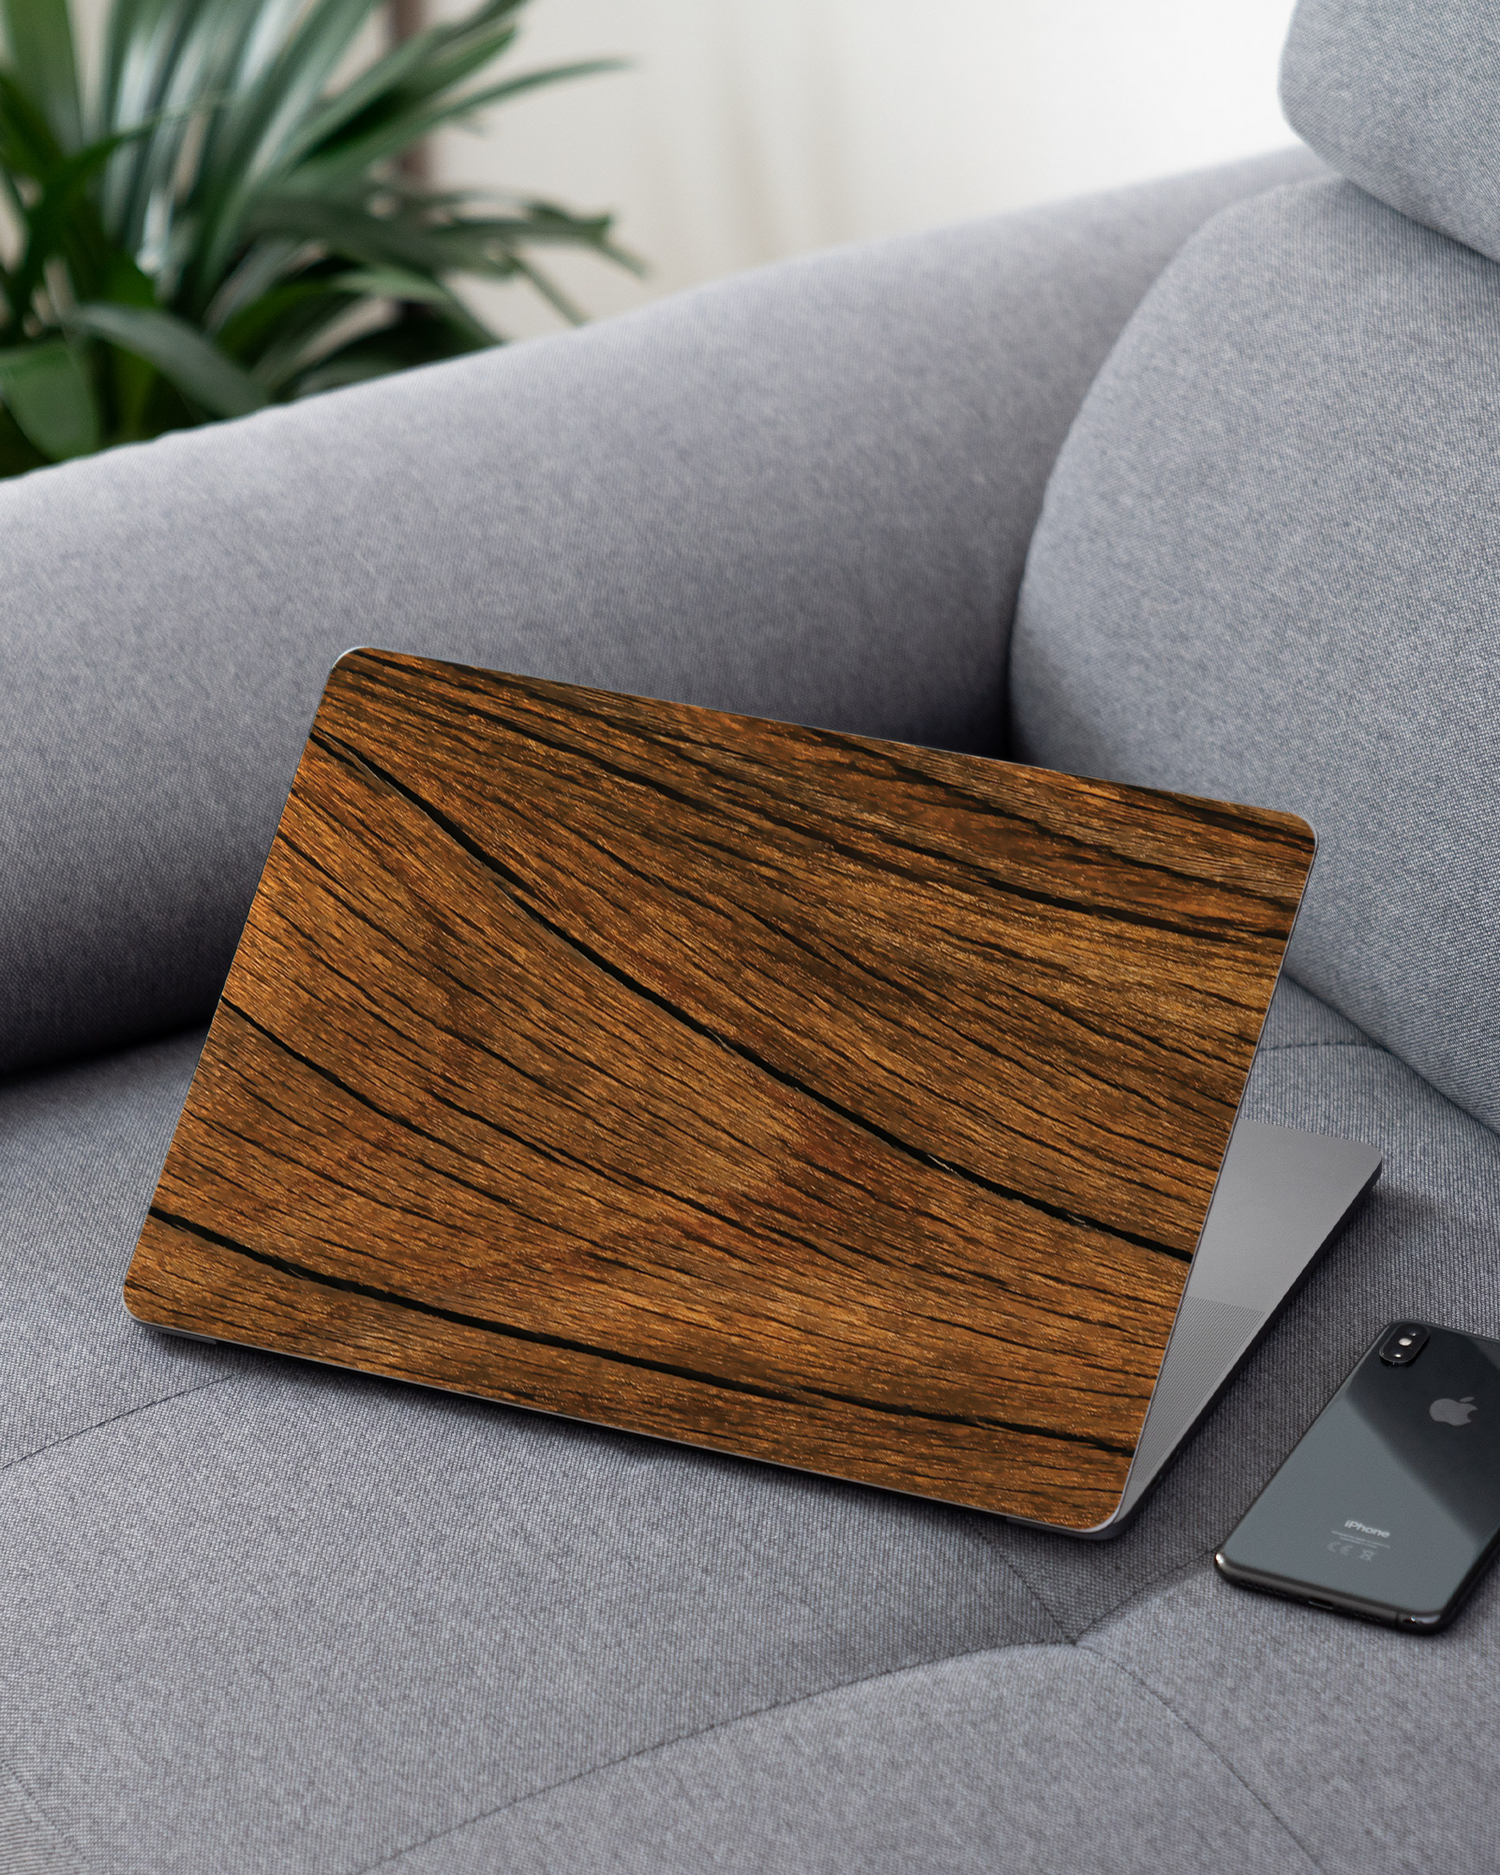 Wood Laptop Skin for 13 inch Apple MacBooks on a couch